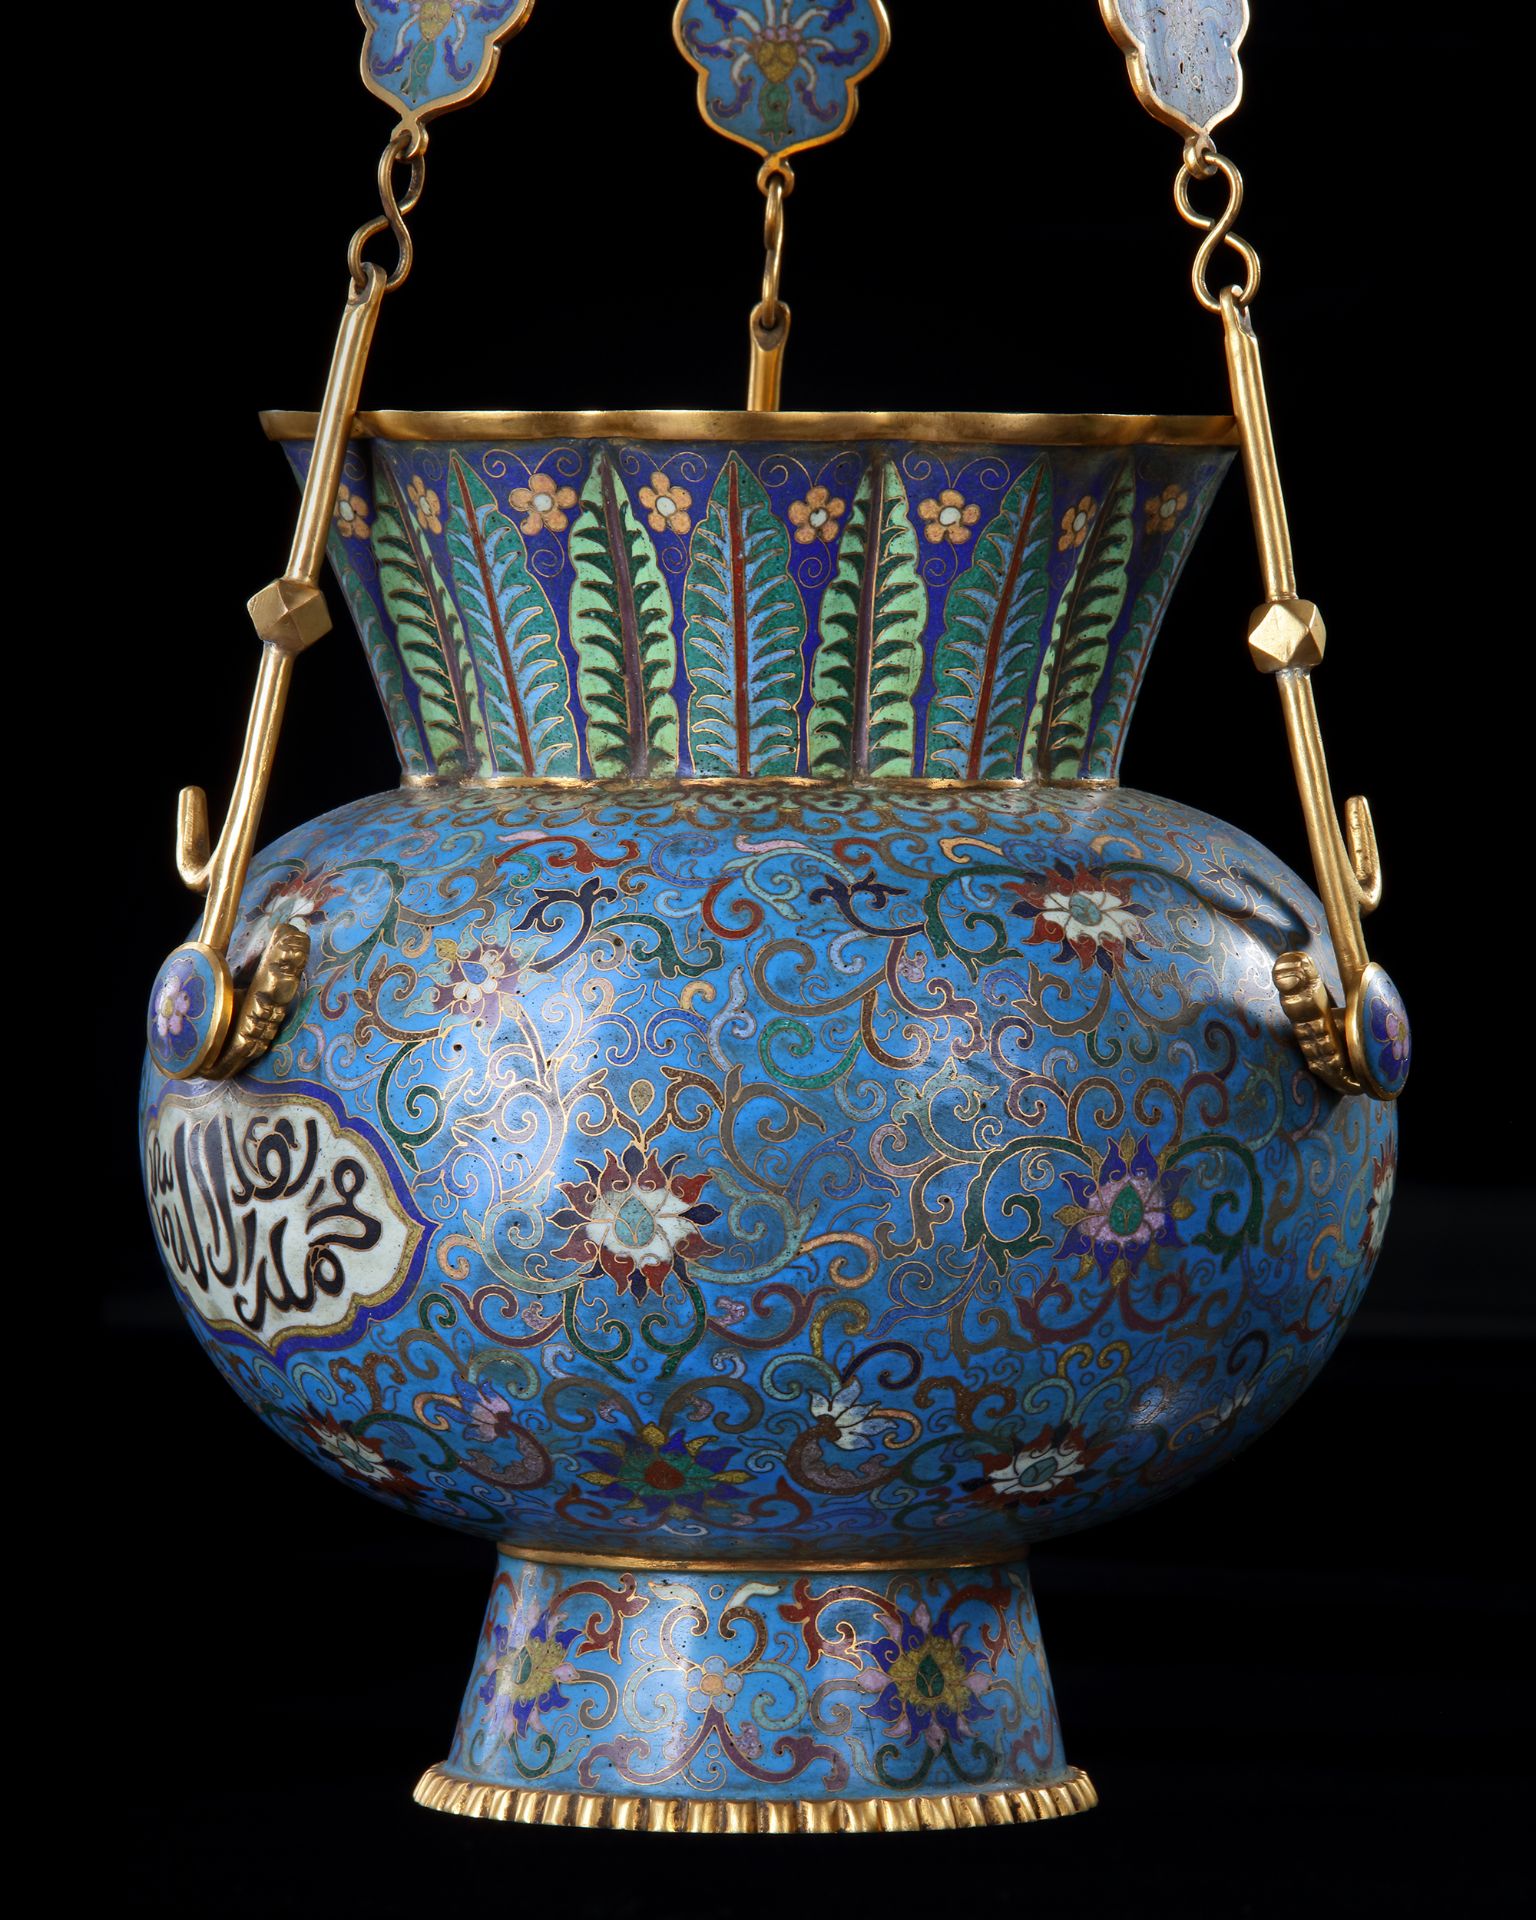 A CHINESE CLOISONNÉ MOSQUE LAMP FOR THE ISLAMIC MARKET, LATE 19TH CENTURY - Image 7 of 10